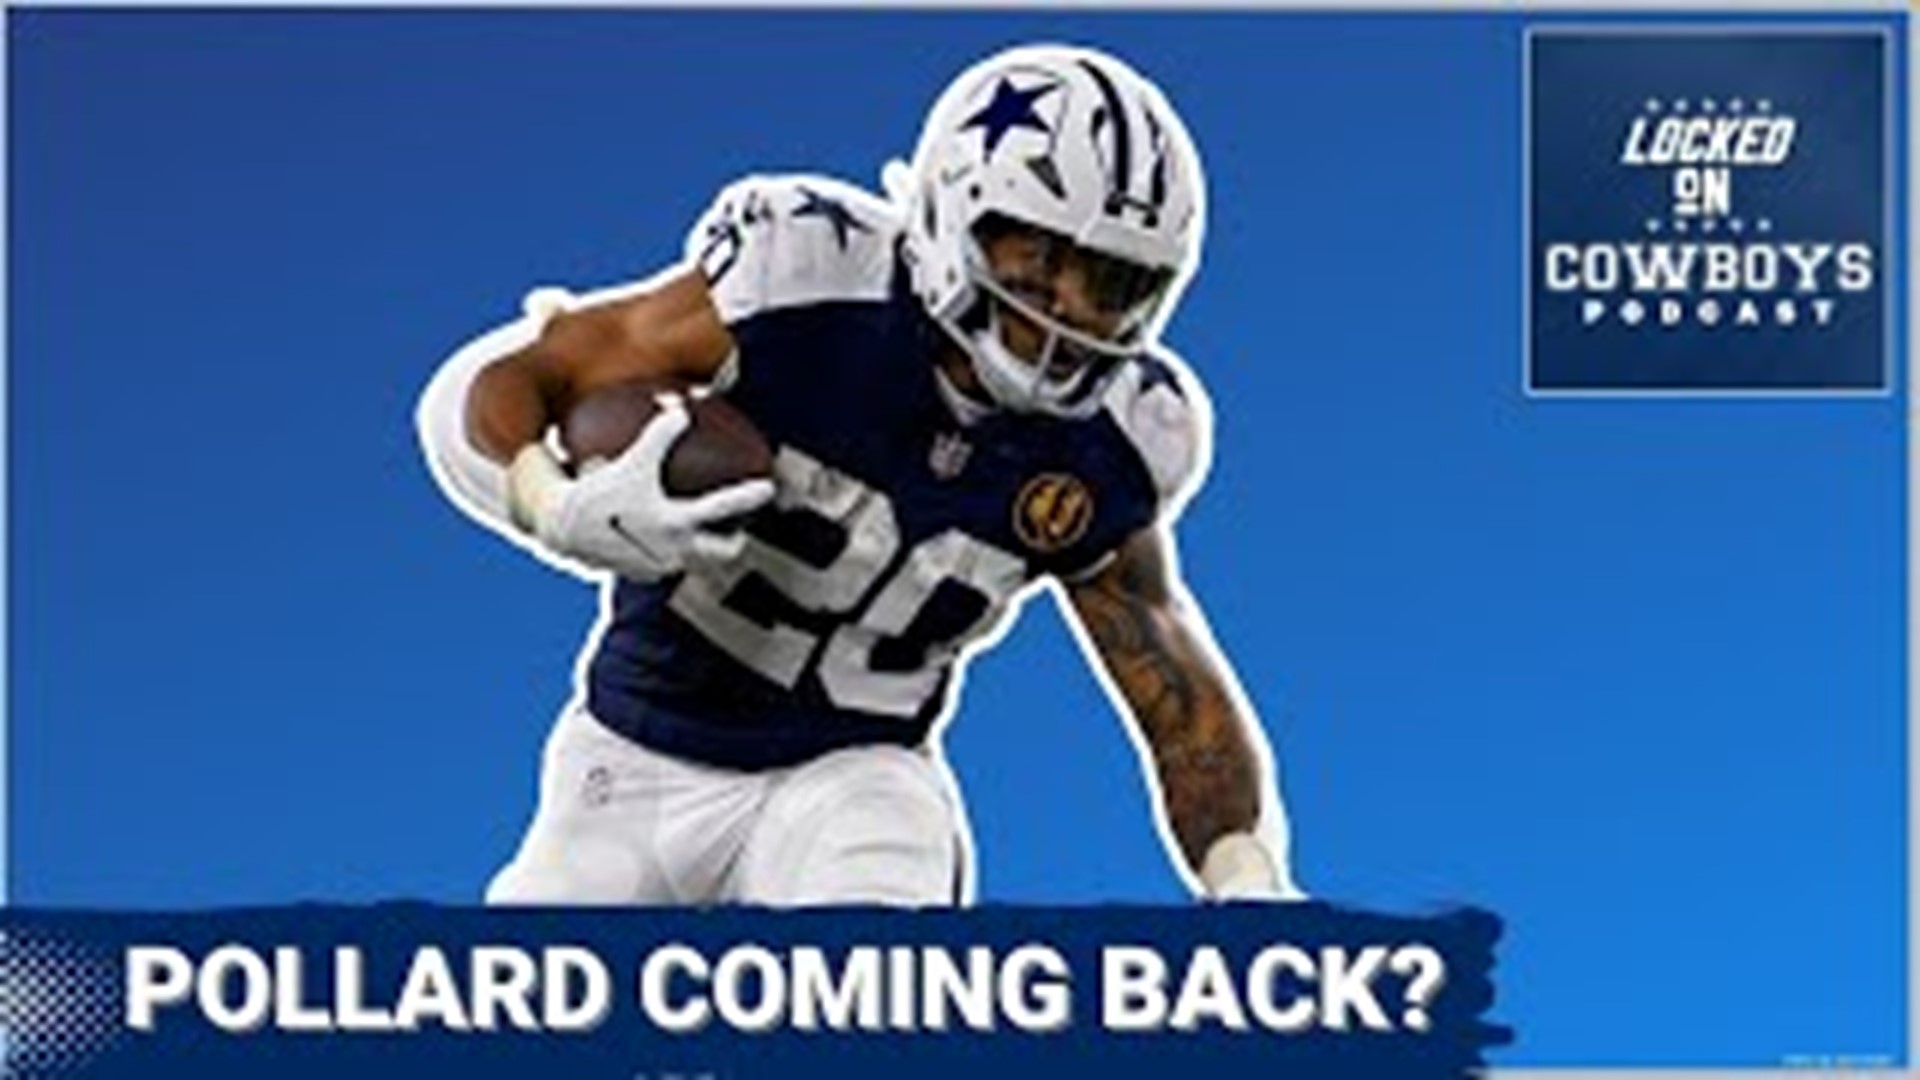 Dallas Cowboys RB Tony Pollard is set to become a free agent next week. But are the Cowboys seriously considering bringing him back for the 2024 season?